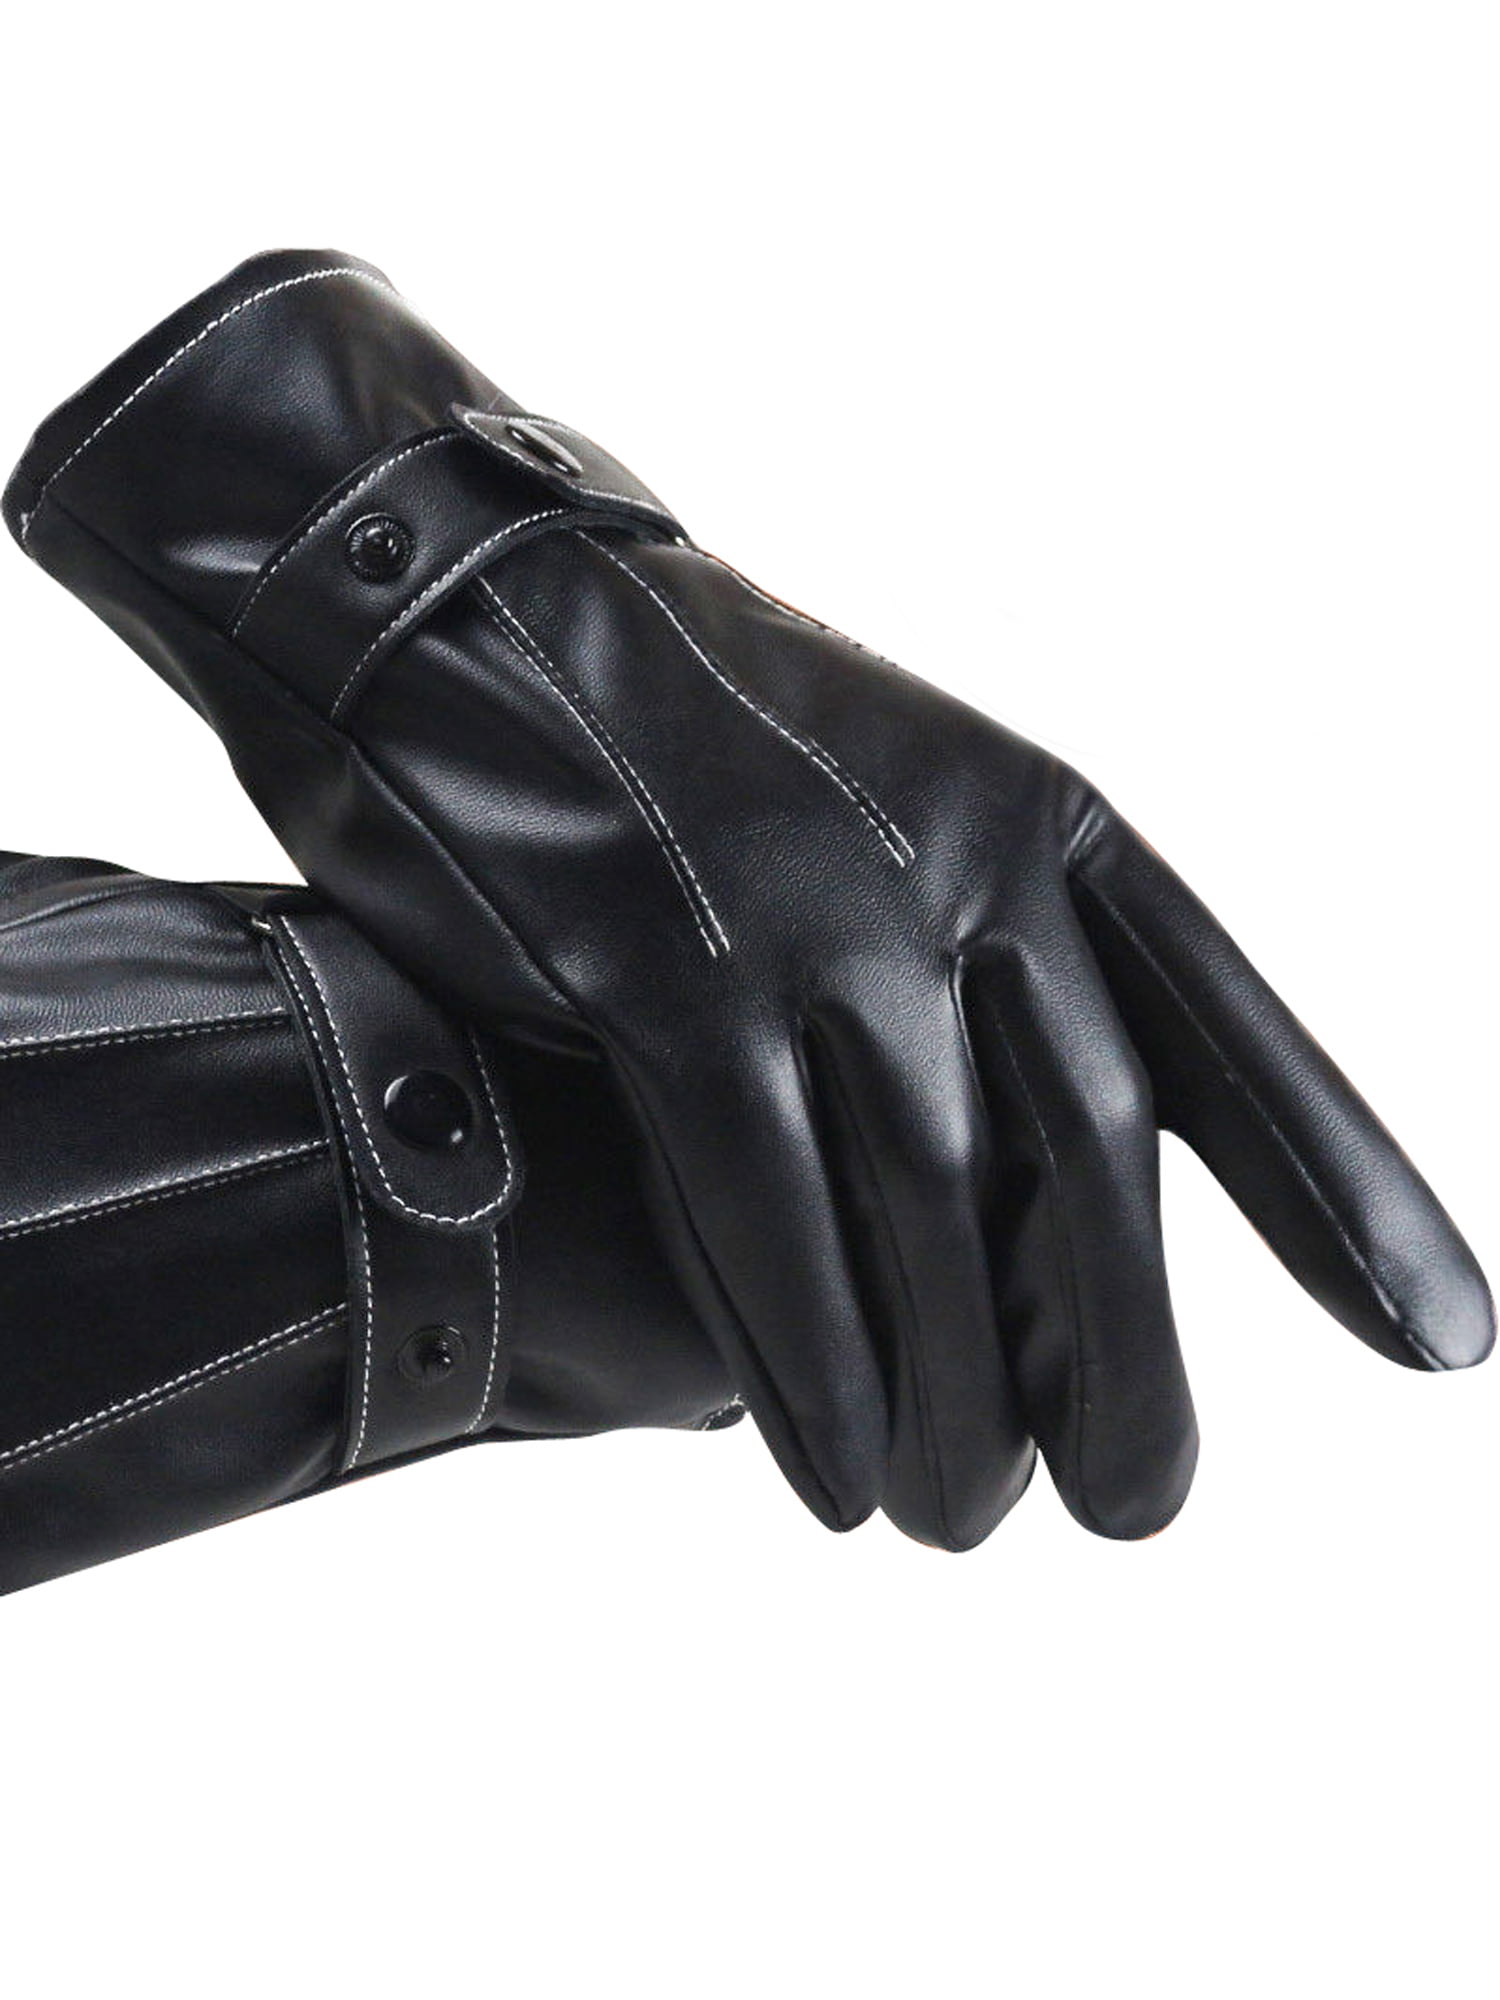 Mens Touch Screen Real Leather Gloves Thermal Lined Black Driving Winter Gift US 